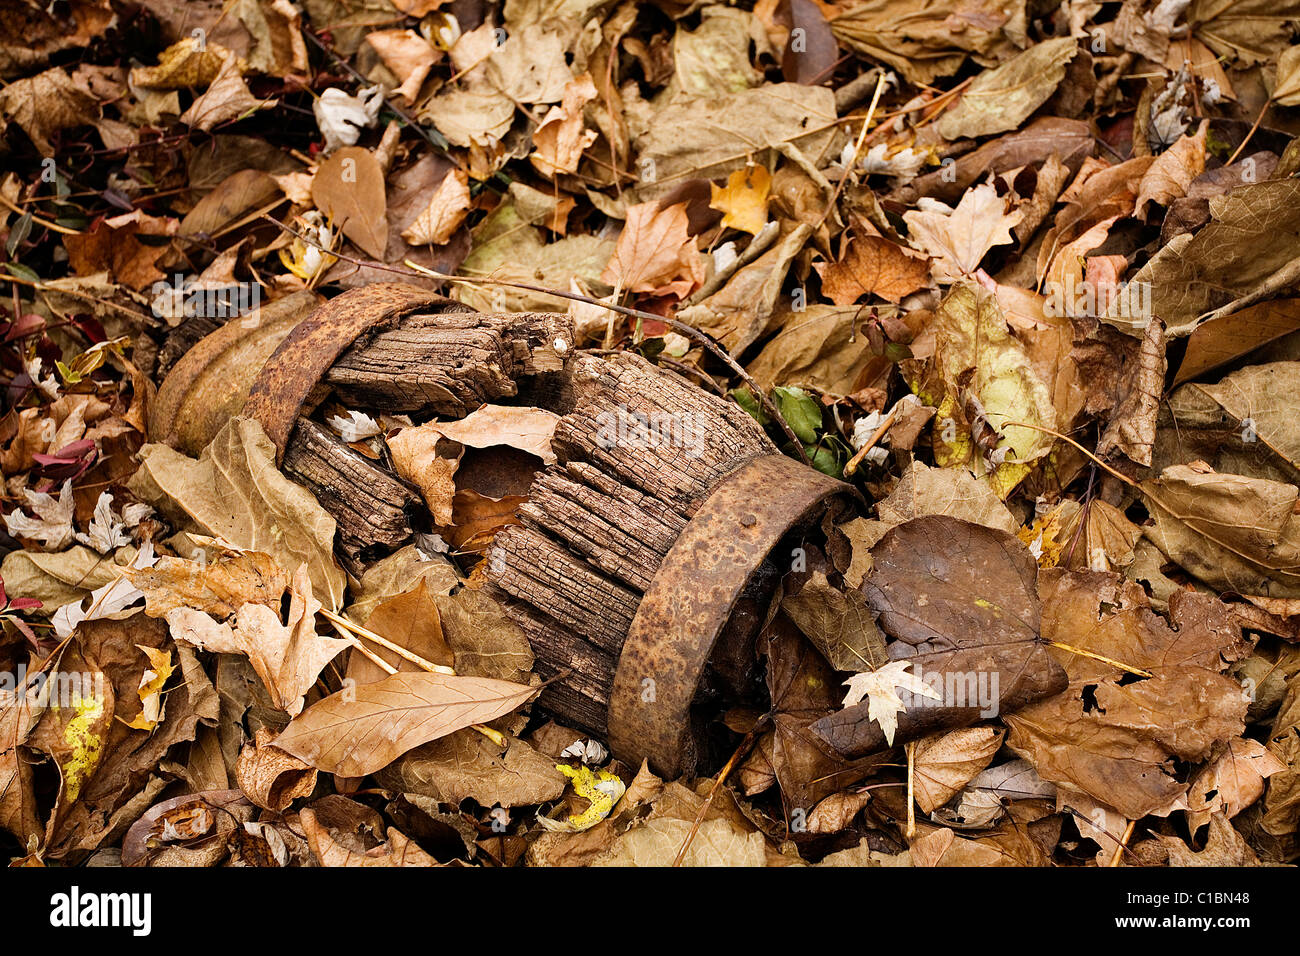 Small, broken barrel buried in Fall leaves. Stock Photo